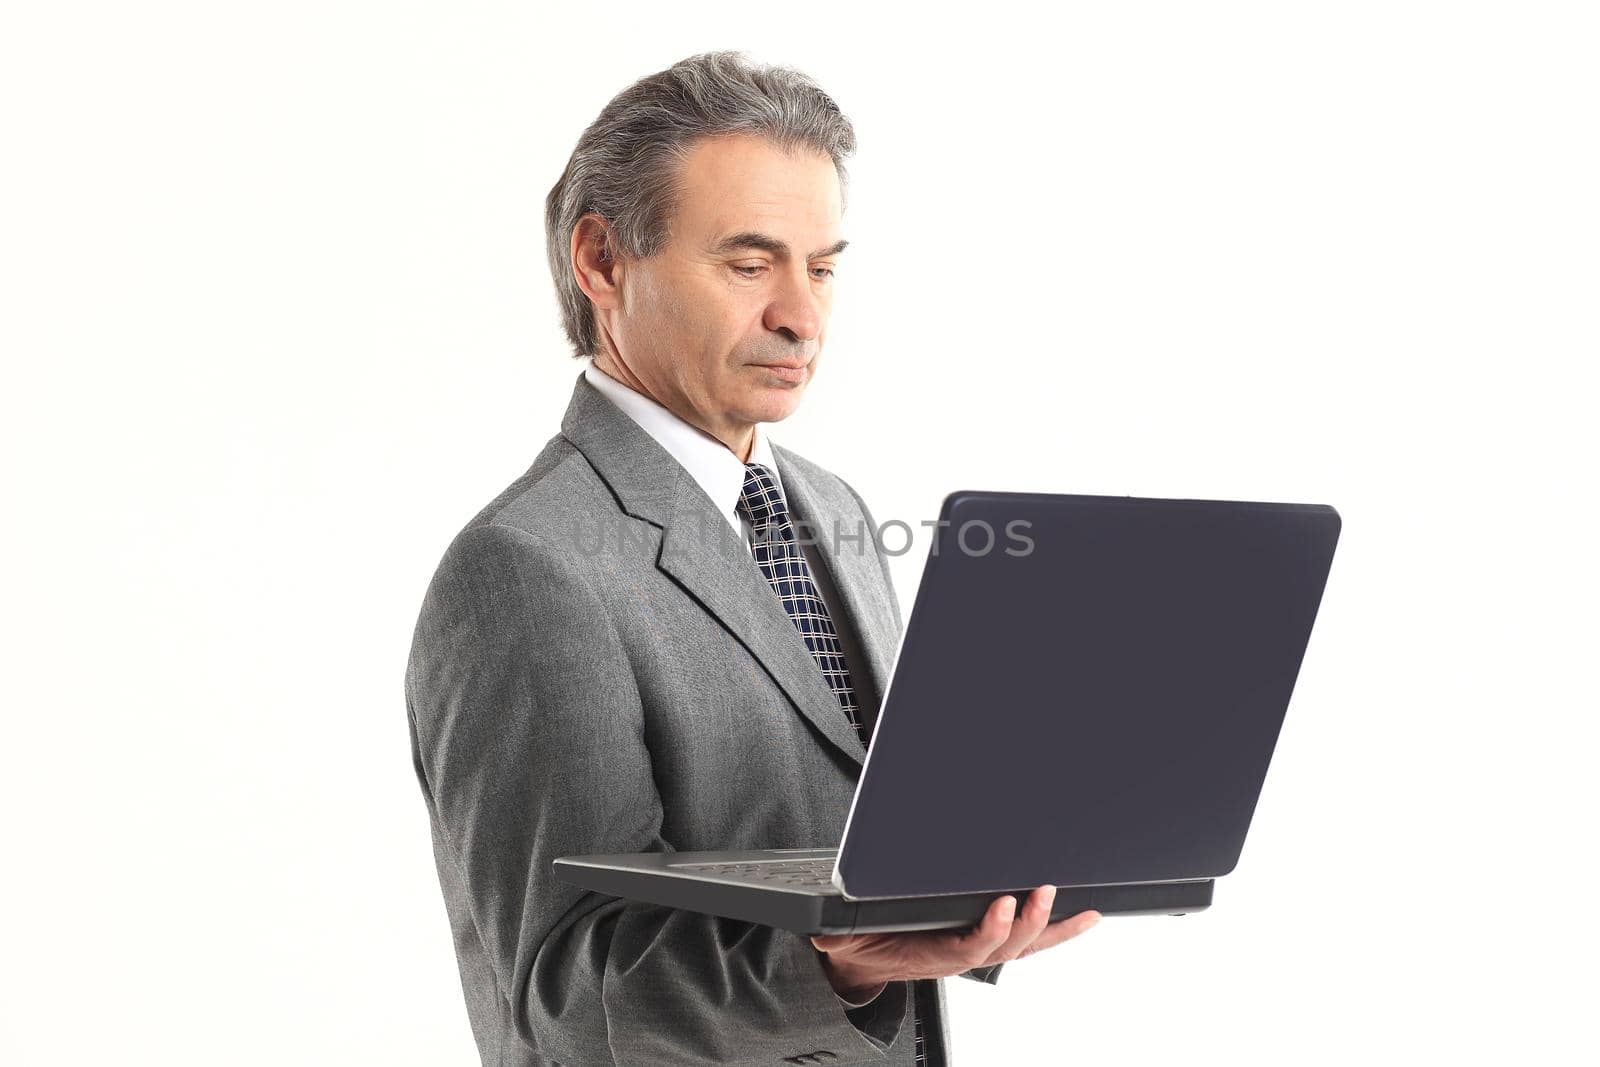 close up.adult businessman looking at laptop screen.isolated on white background.